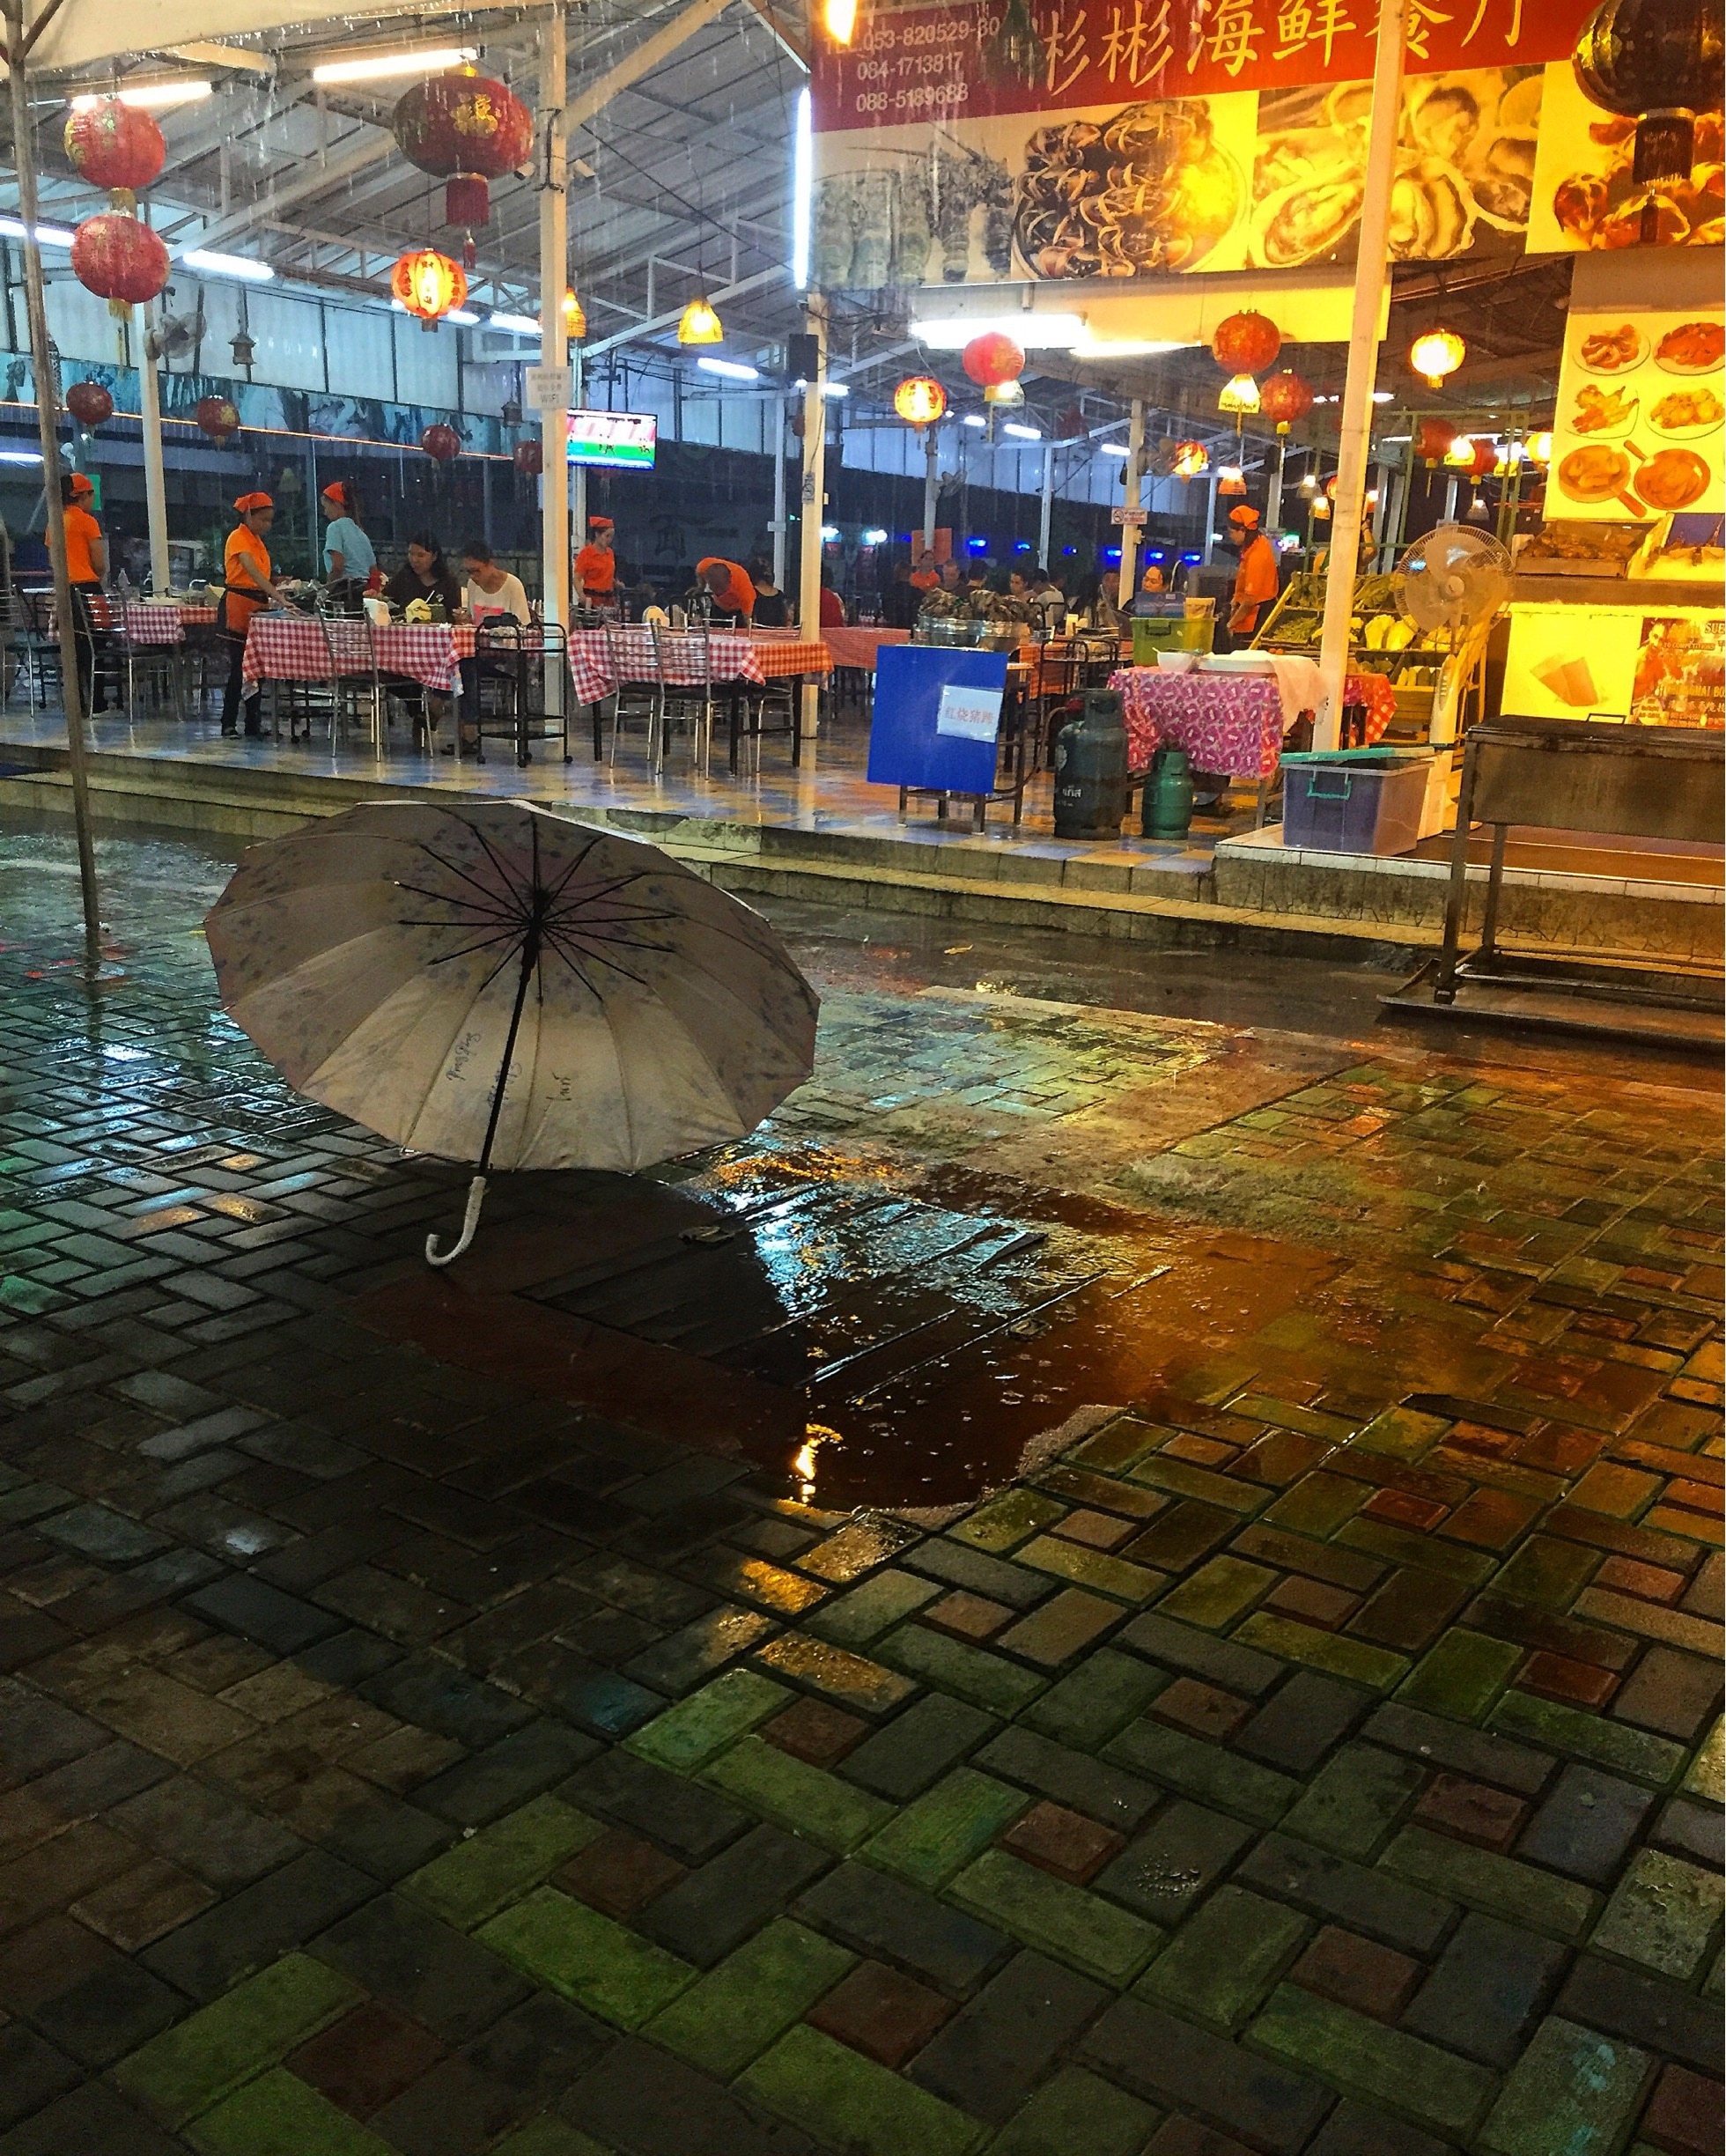 Rainy night at the night bazaar. 

The night bazaar in Chiang Mai's old town is a wonderfully colorful   market, tables full of local handicrafts. Restaurants and roti stands line the perimeter, making it a great spot to spend an evening. Crowding the sidewalks outside this covered marketplace, local vendors stretch for blocks selling anything from knock-off designer bags to carved wooden statues. Get ready to haggle....